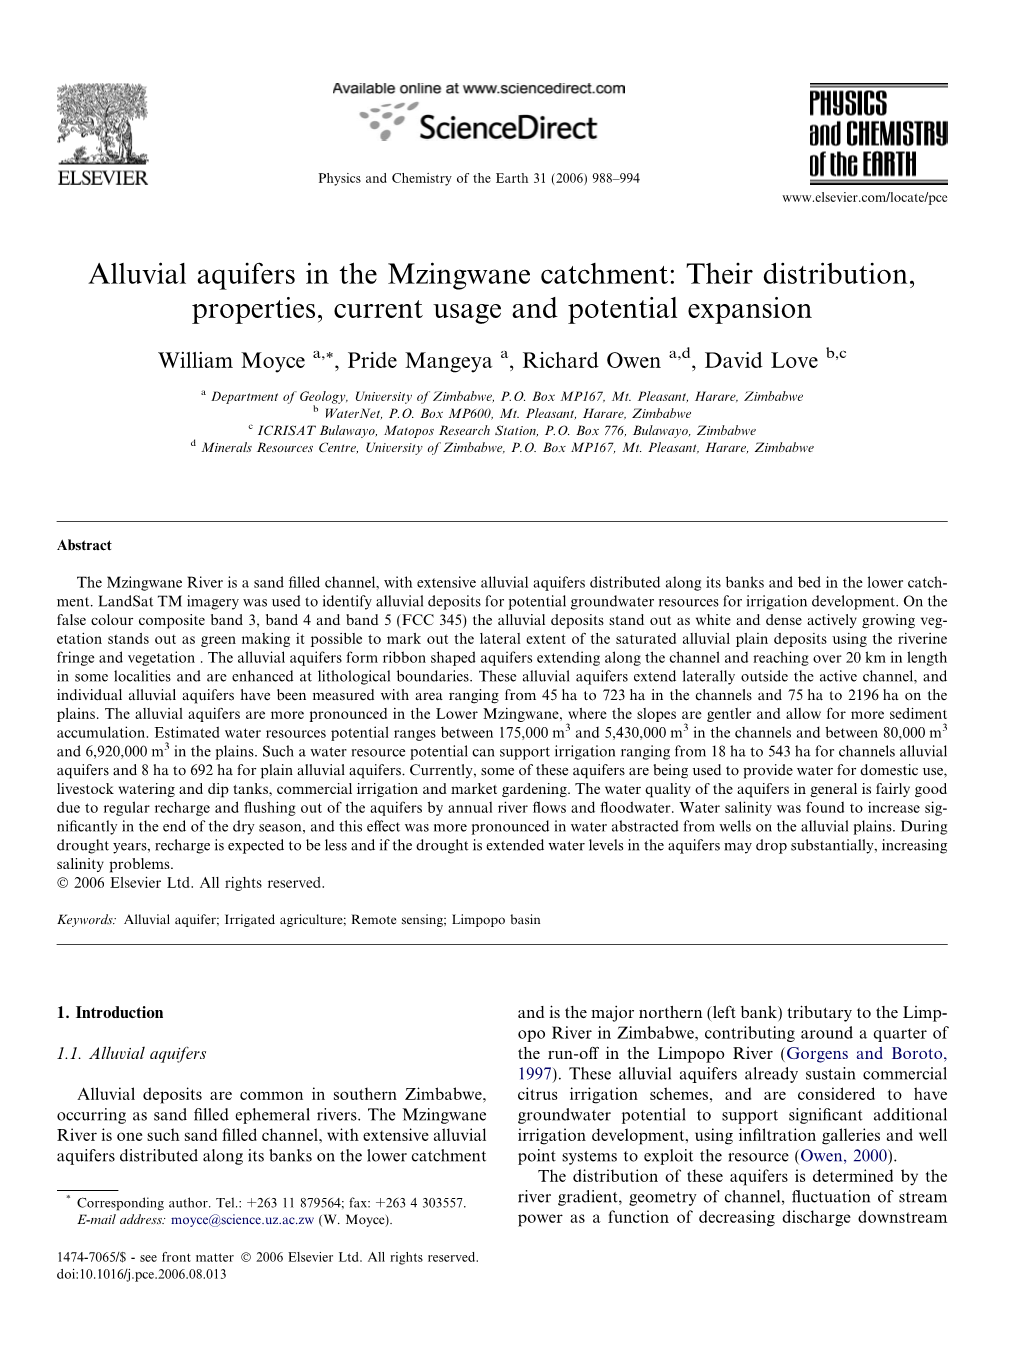 Alluvial Aquifers in the Mzingwane Catchment: Their Distribution, Properties, Current Usage and Potential Expansion